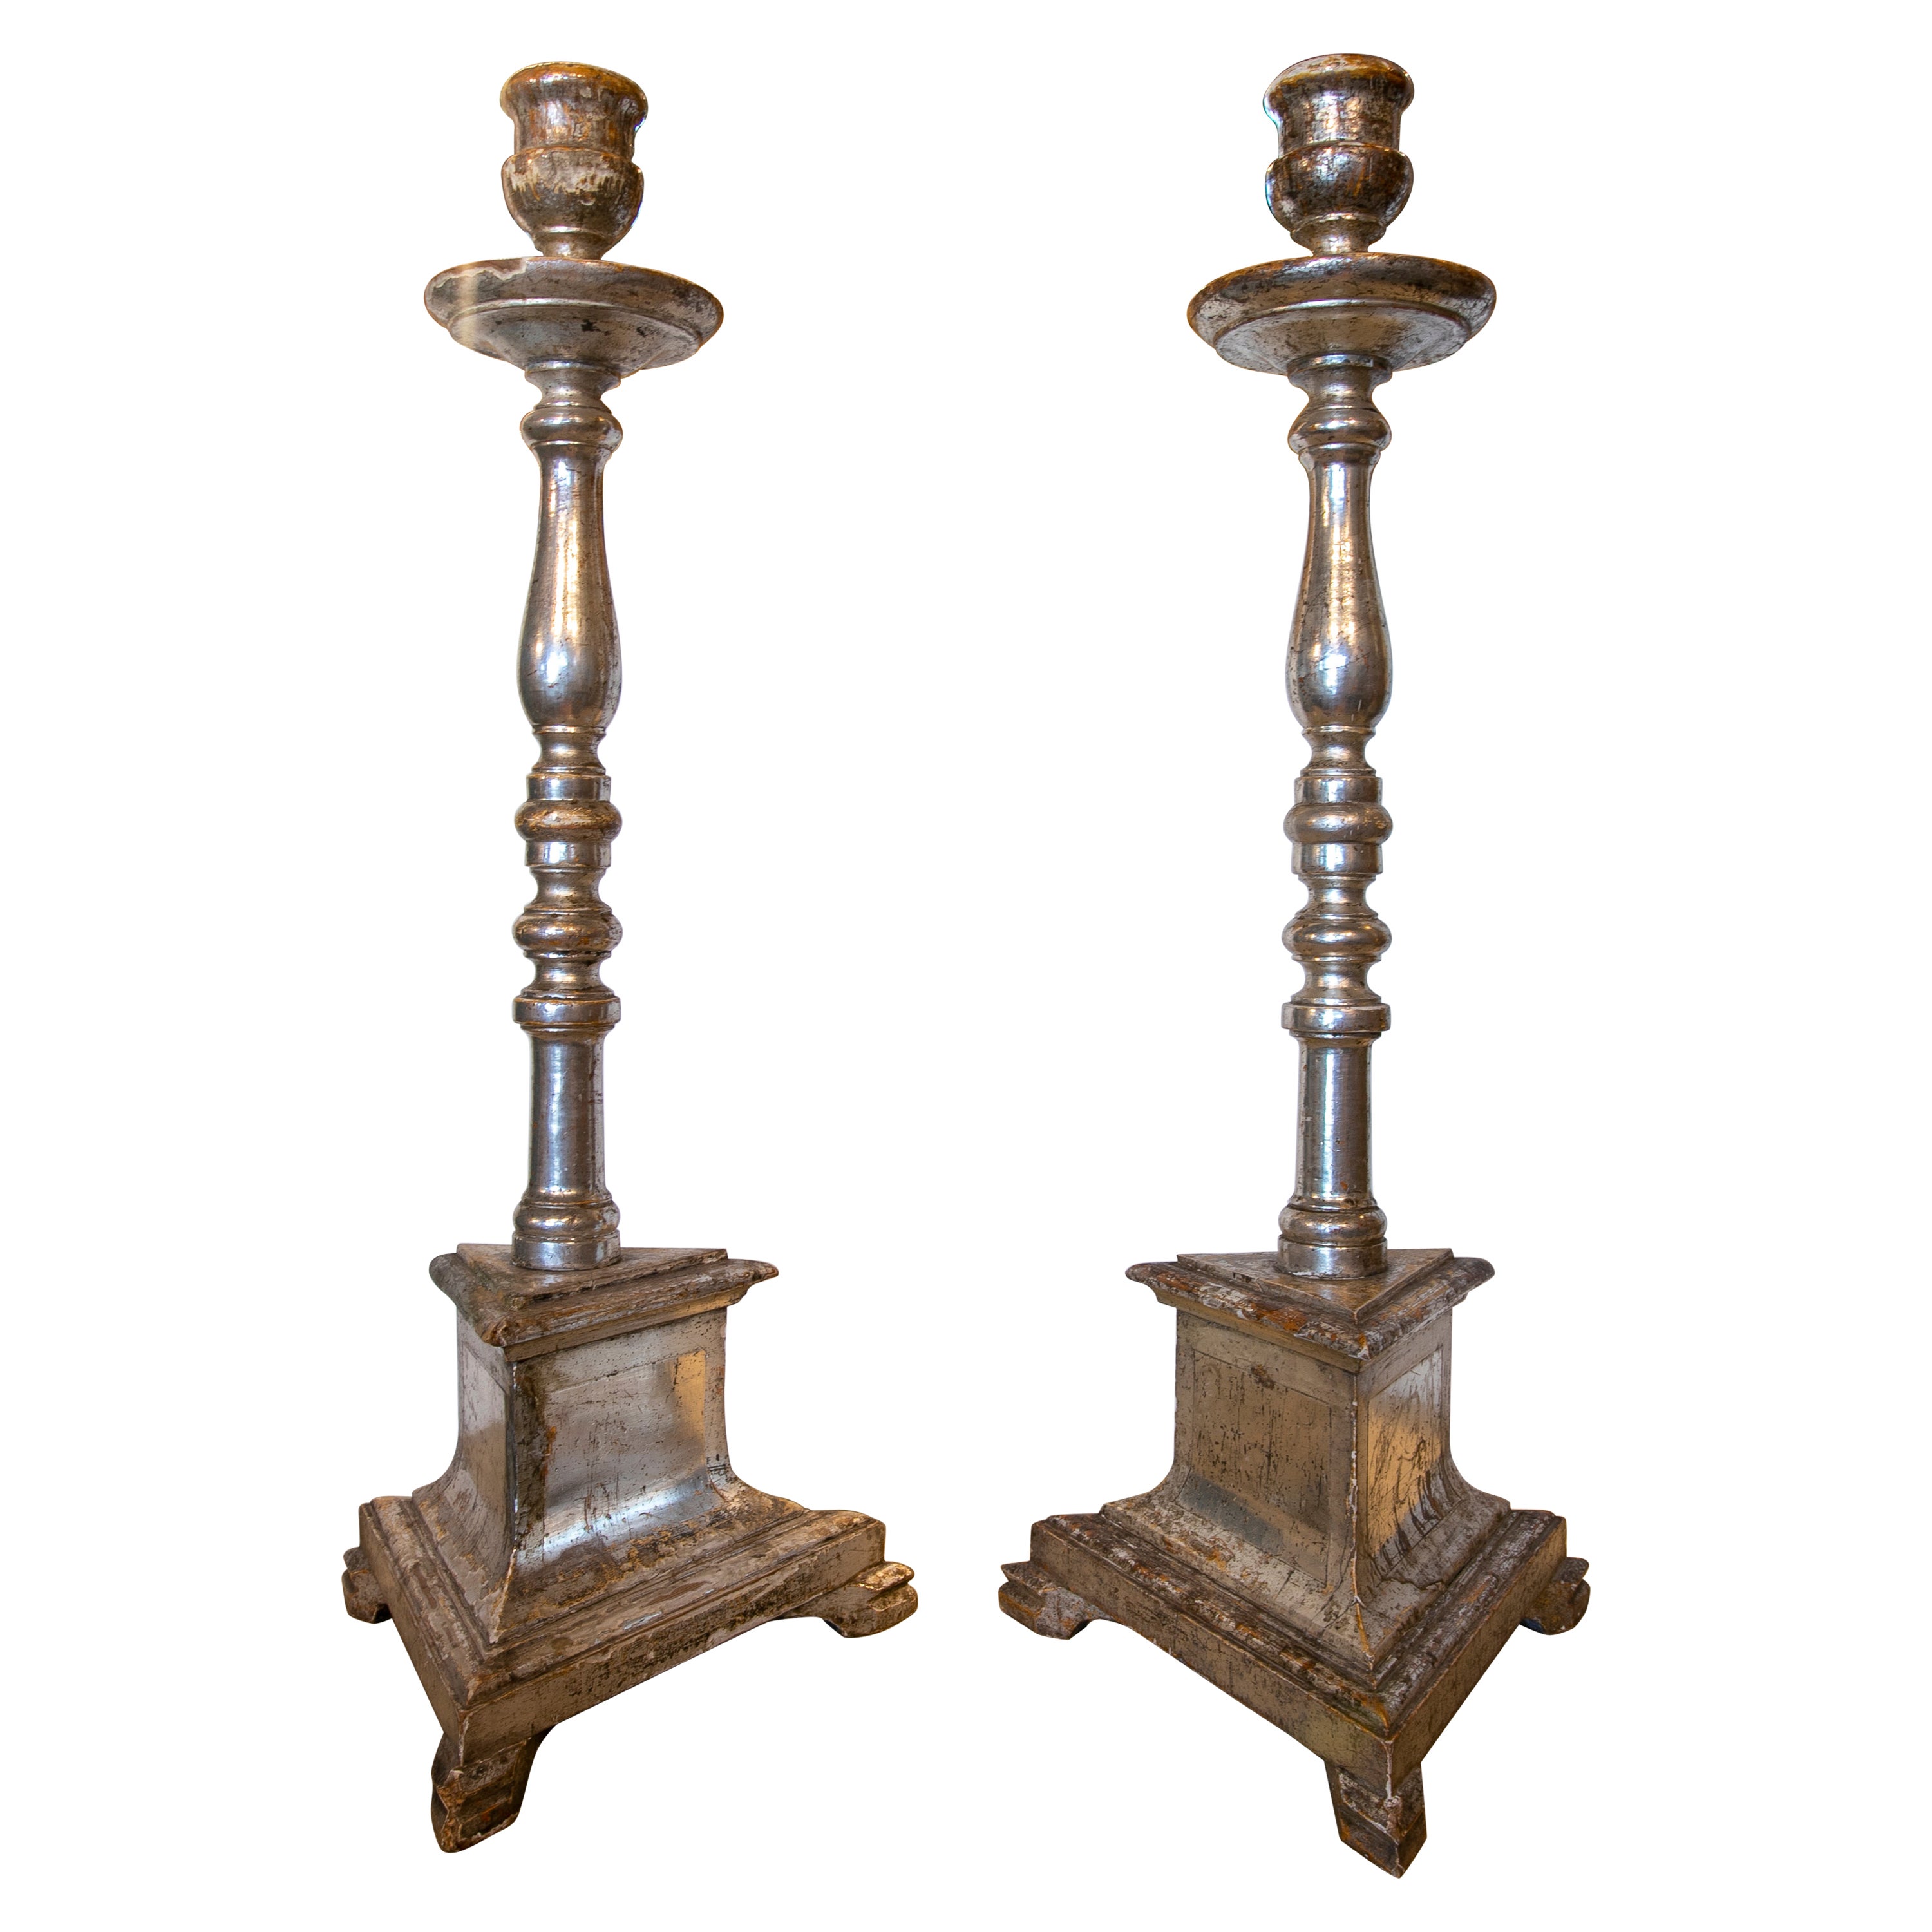 18th century Spanish Pair of Wooden Axe Holders Silver Plated For Sale